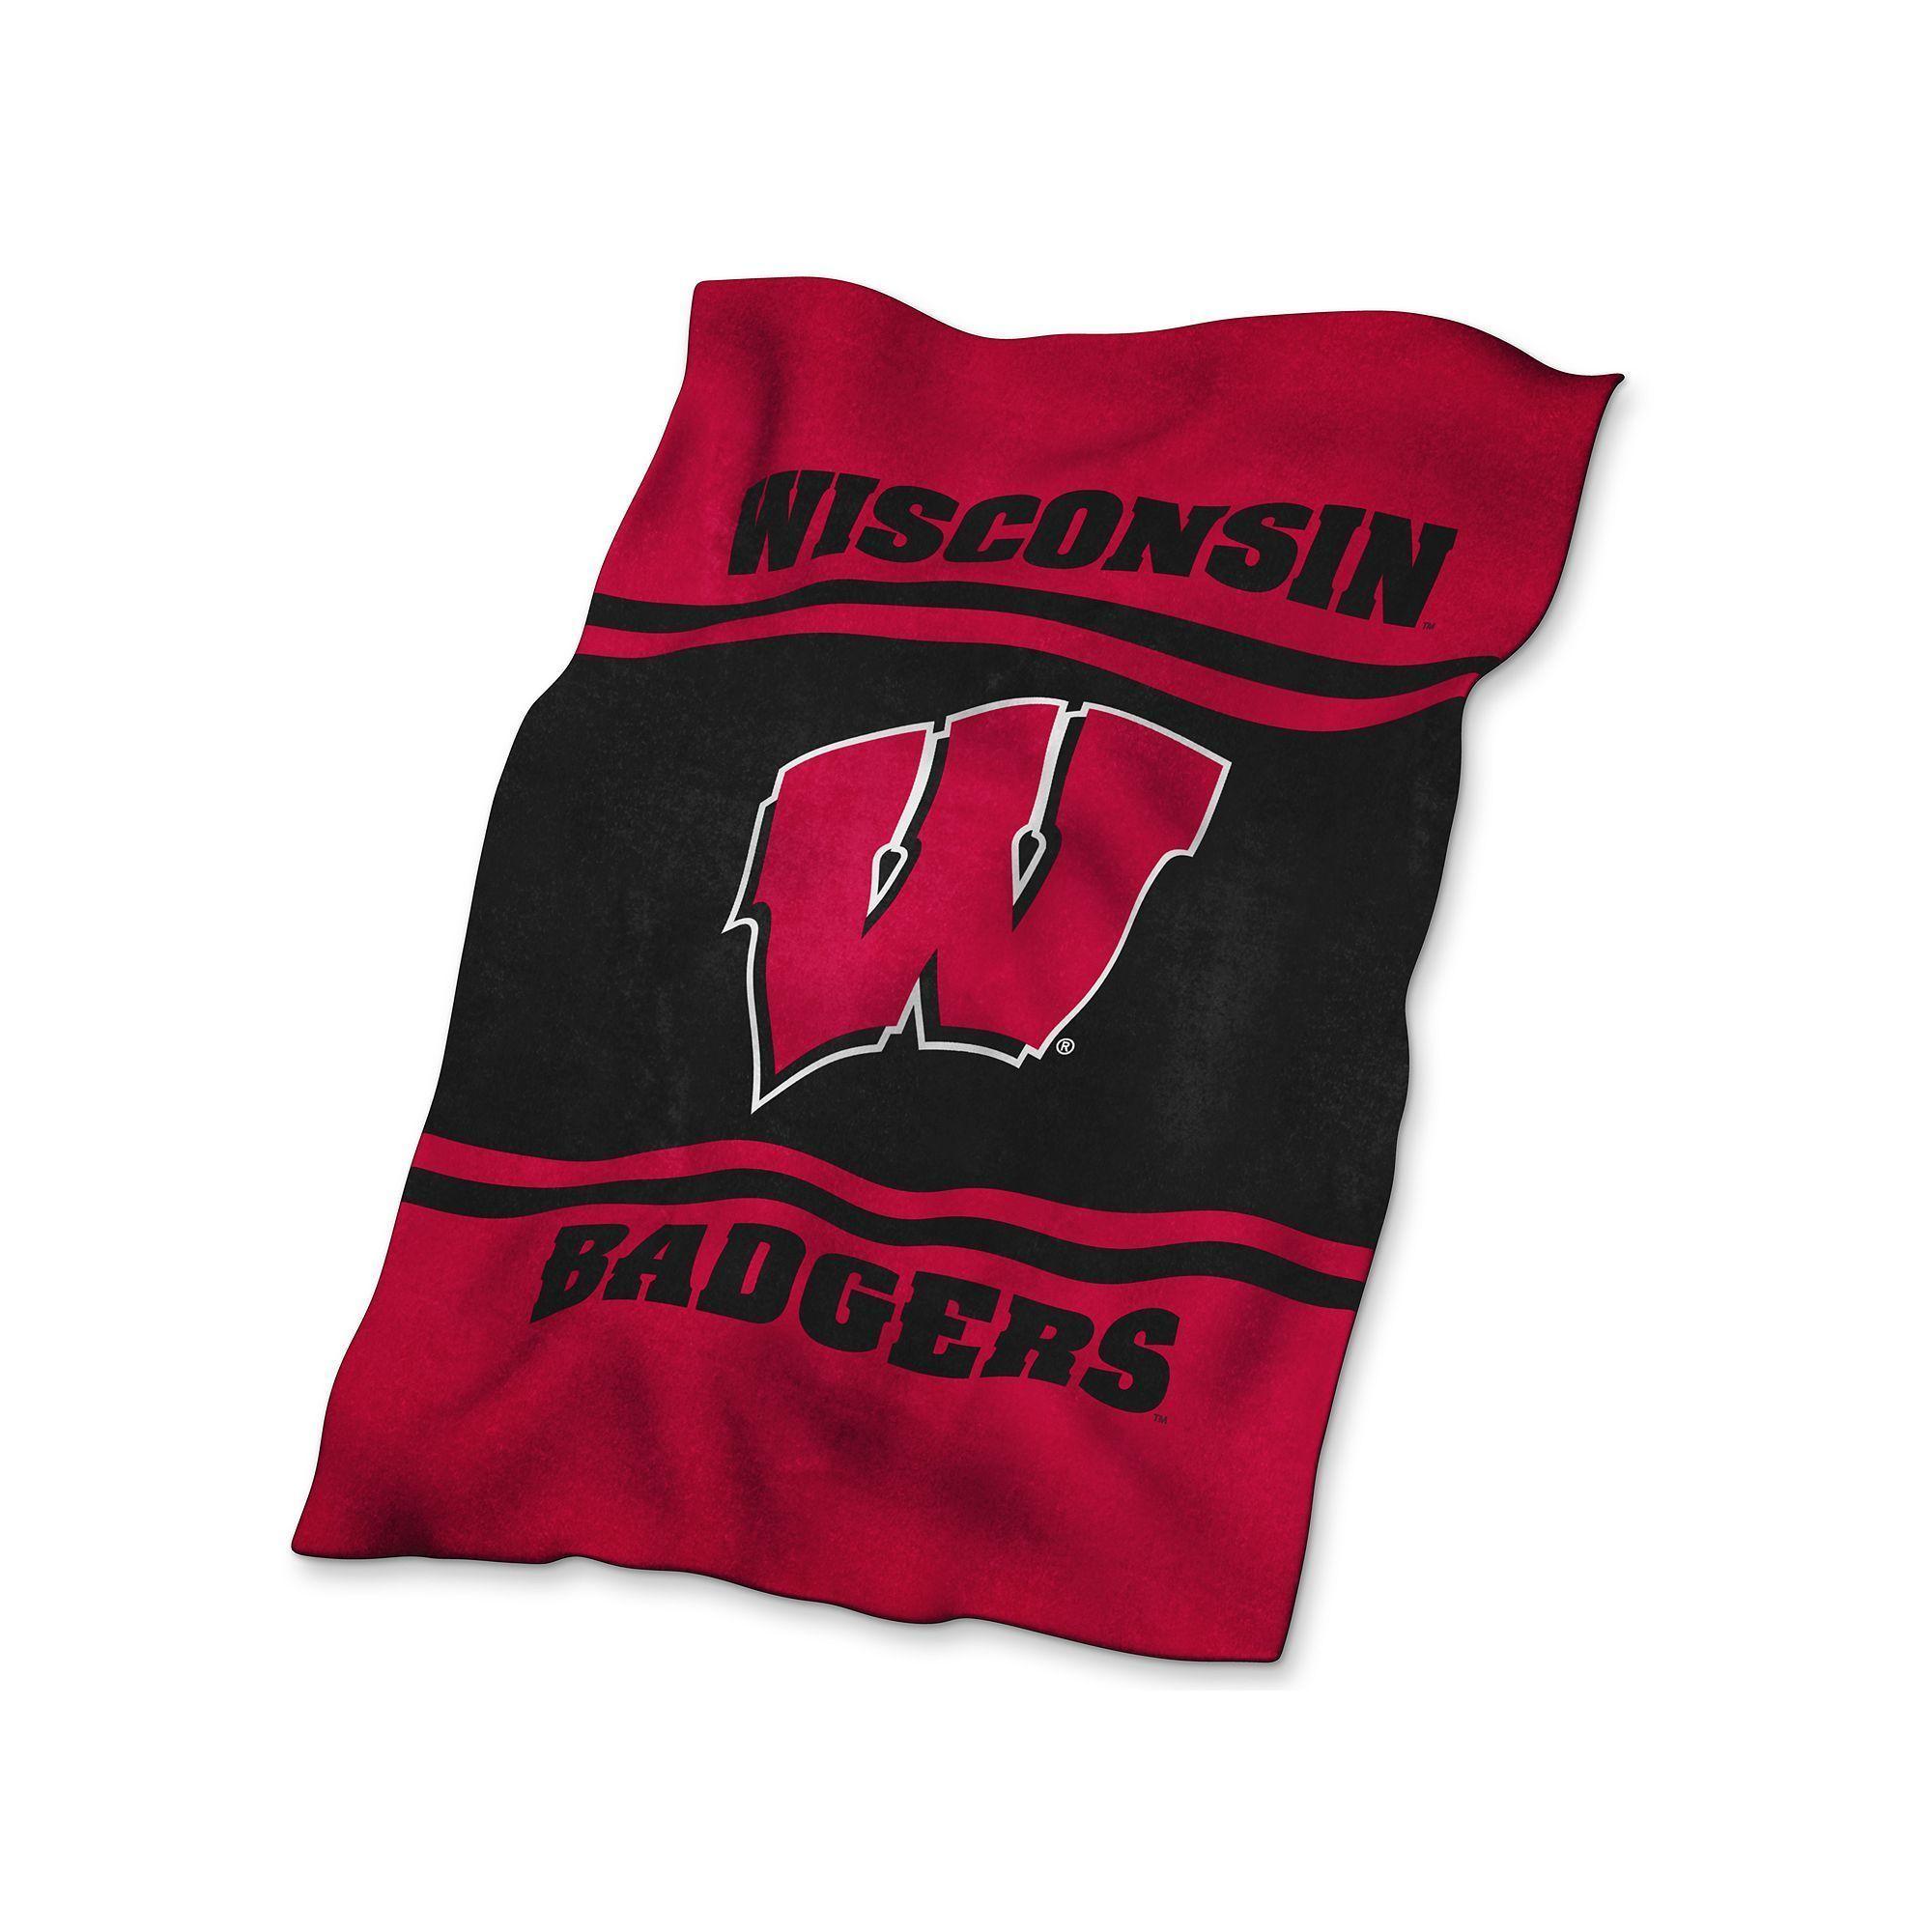 Pink Wisconsin Logo - Wisconsin Badgers UltraSoft Blanket, Multicolor. Products